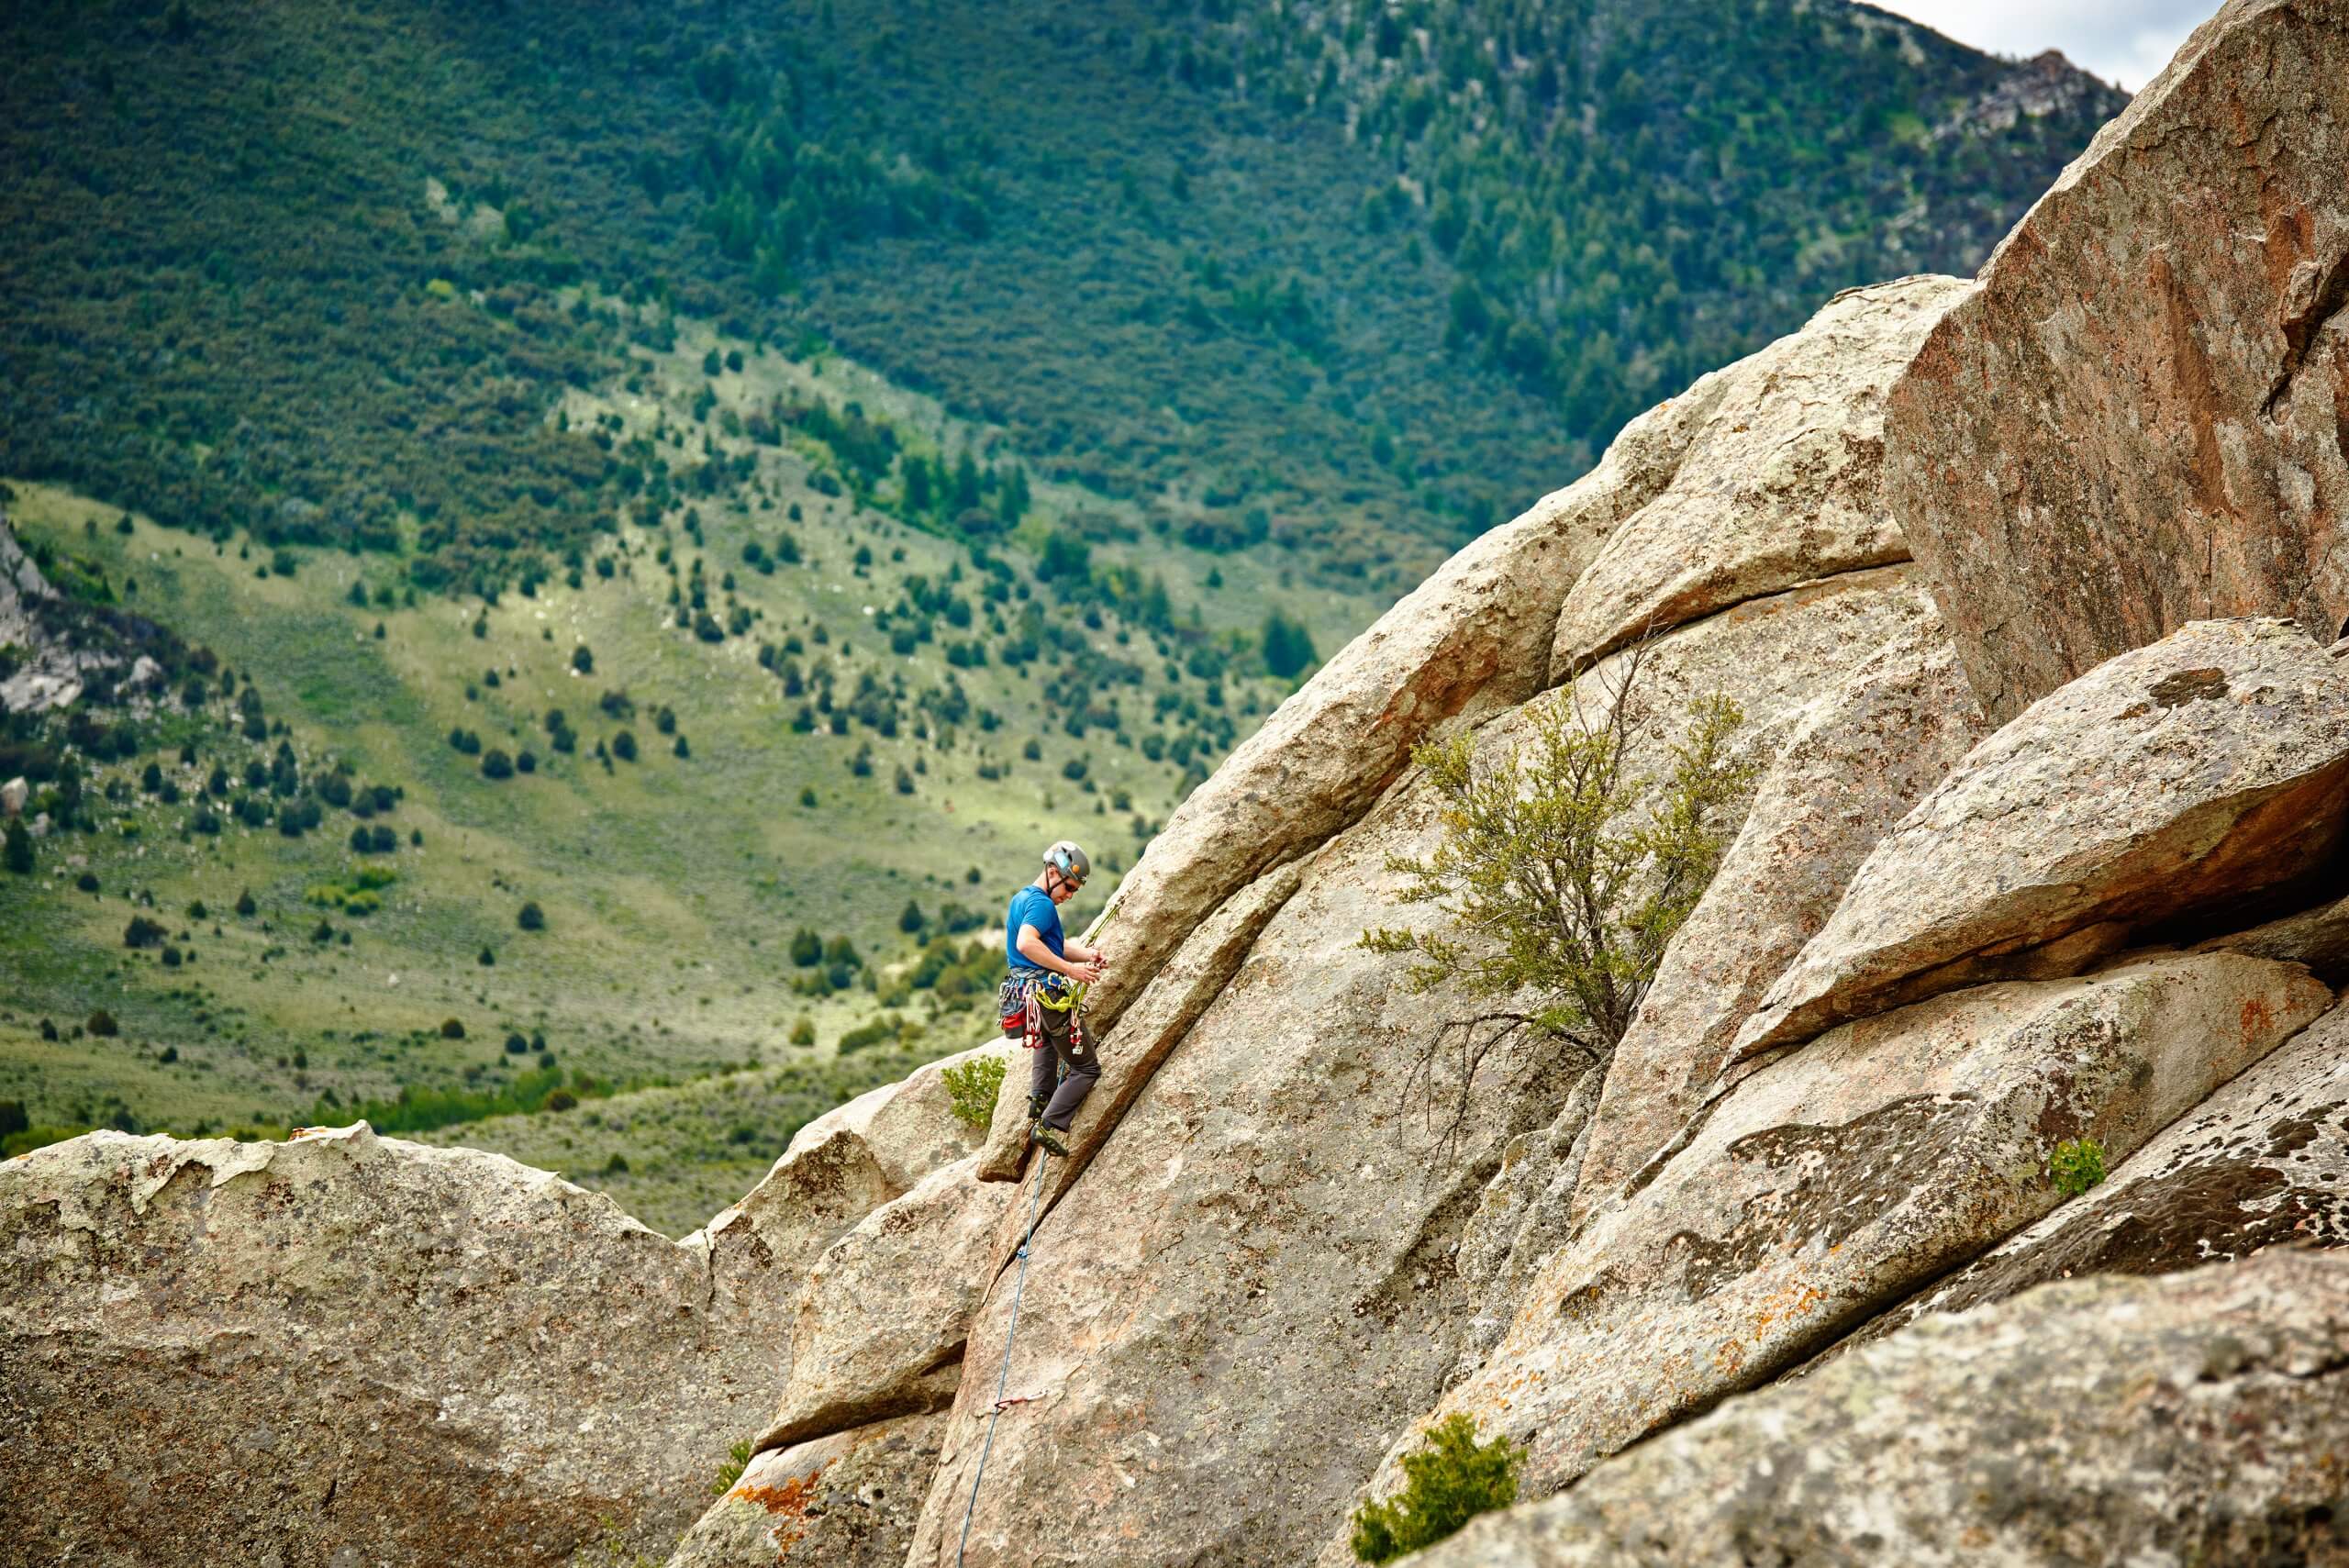 A person rock climbing at Castle Rocks State Park.